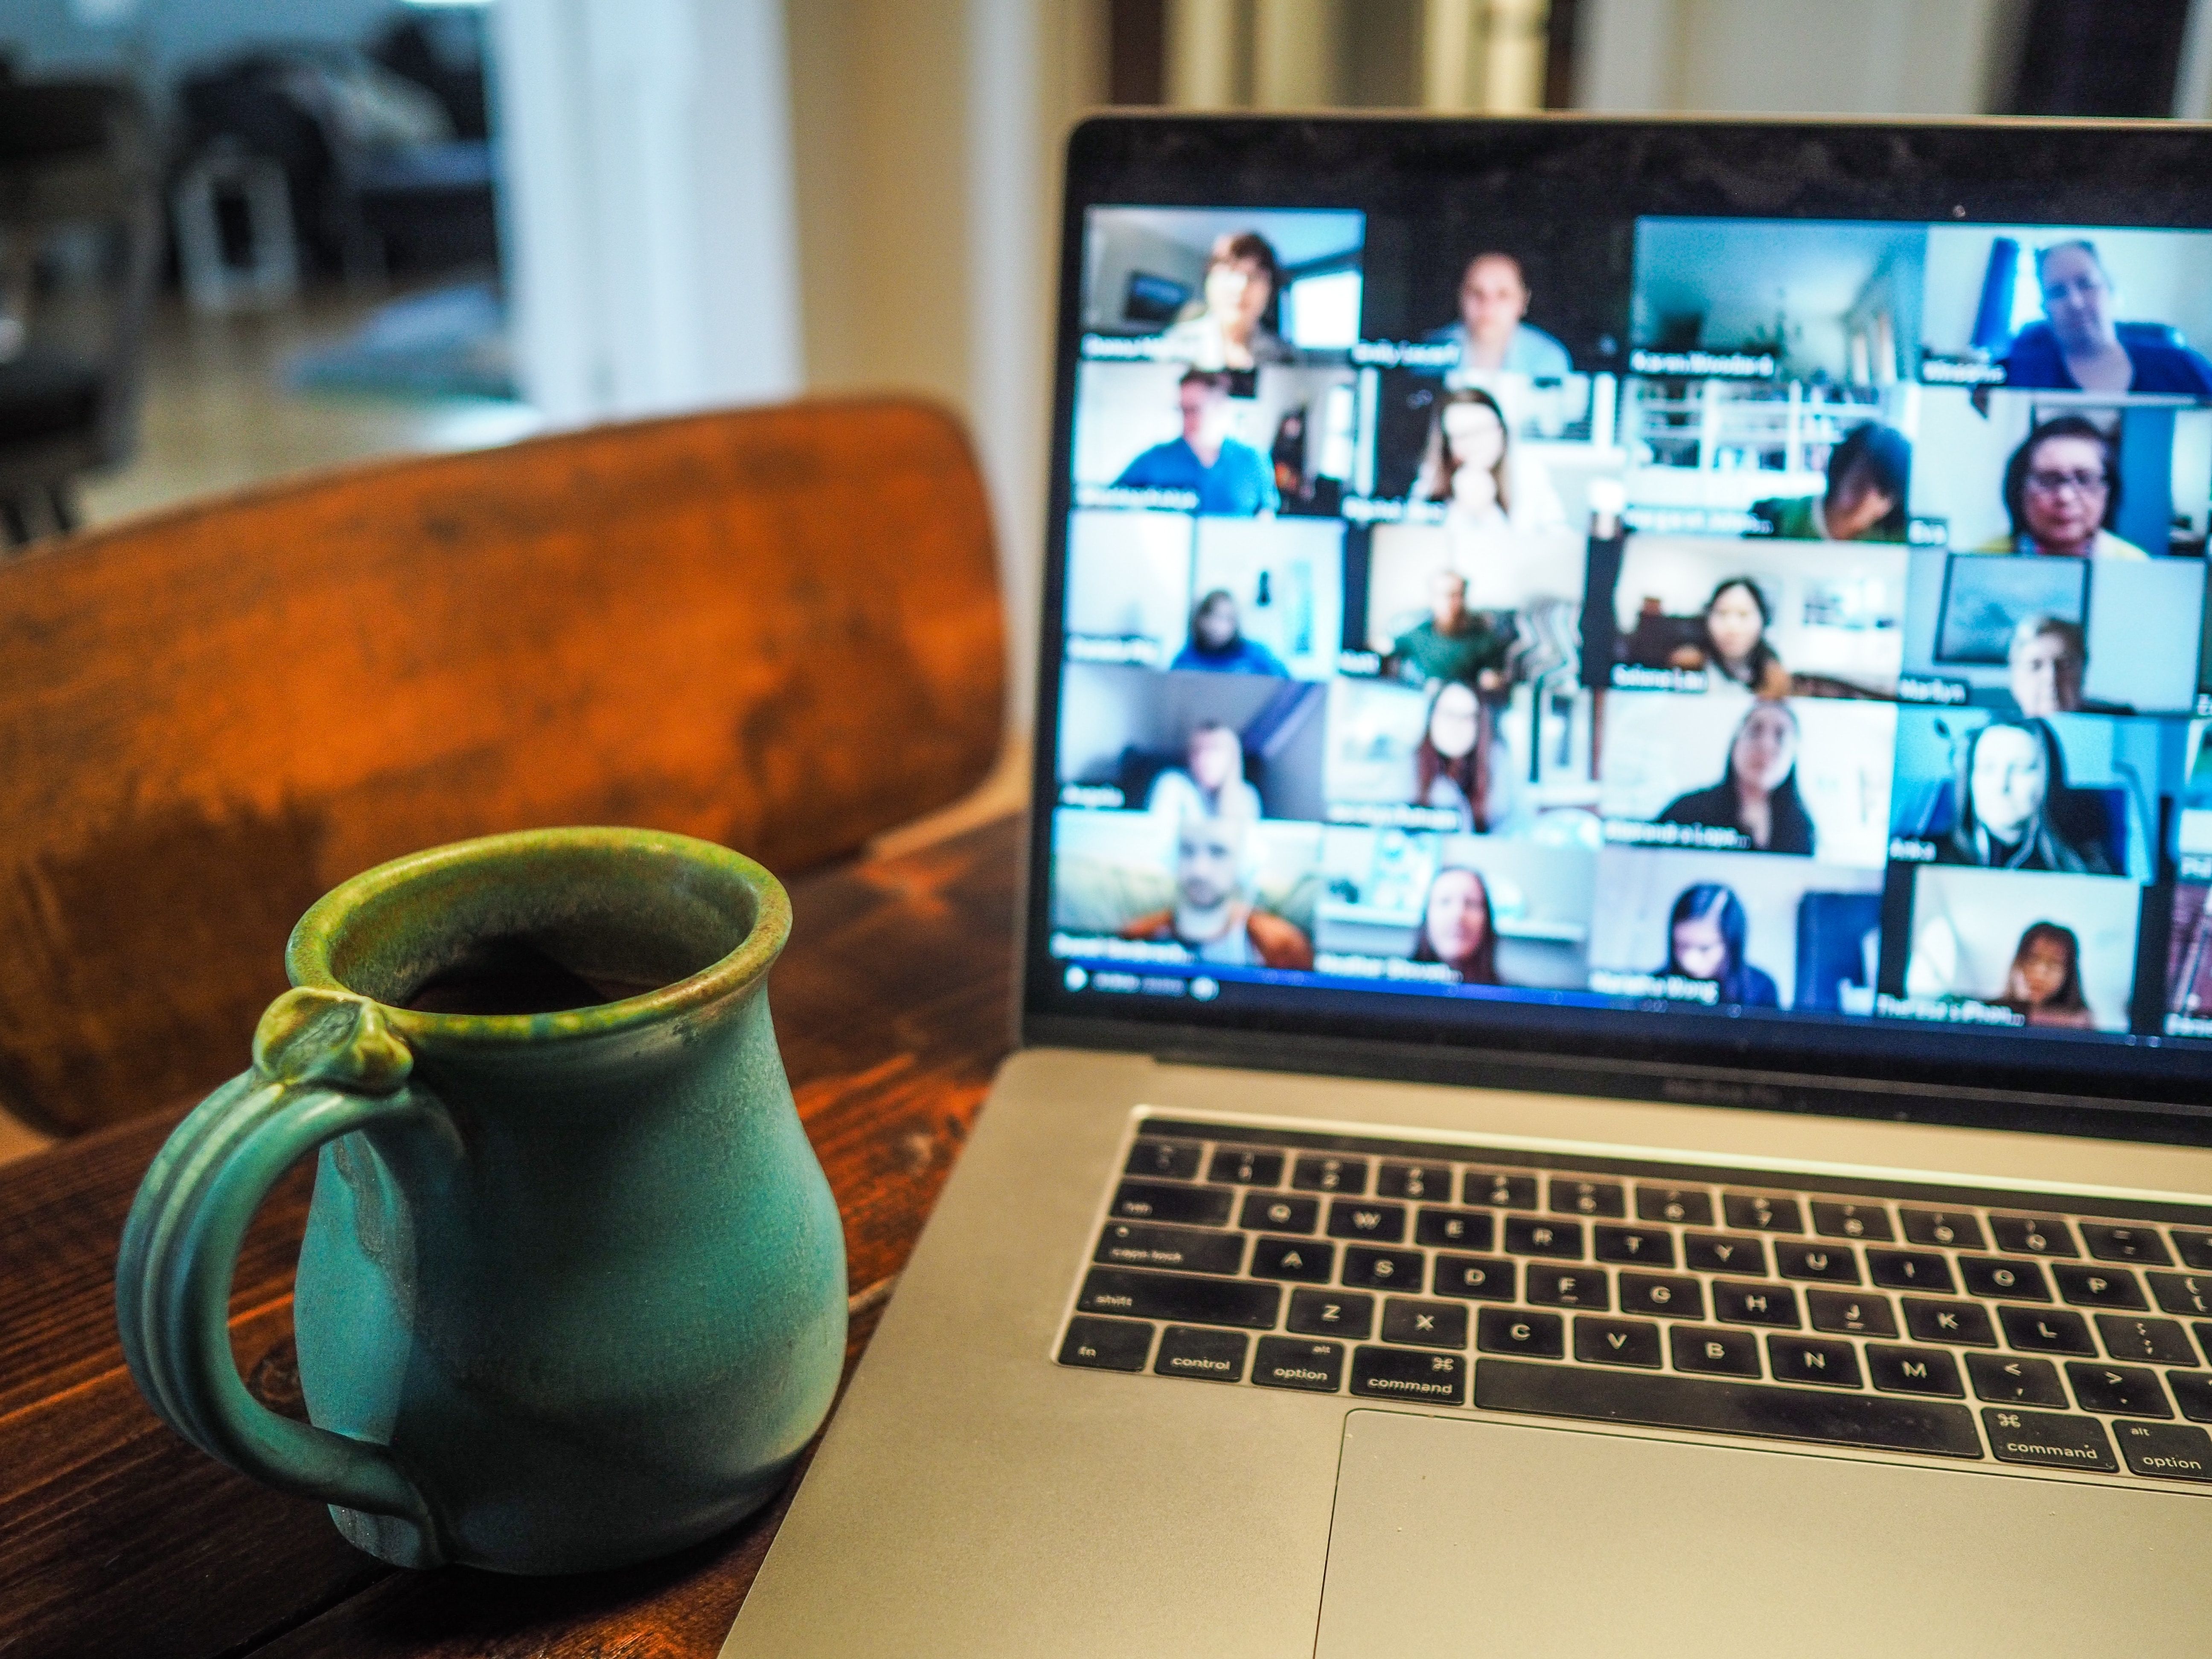 An image of a blue coffee cup on a table next to a laptop. On the laptop screen is 20 plus tiny images of people in a video conference meeting. 